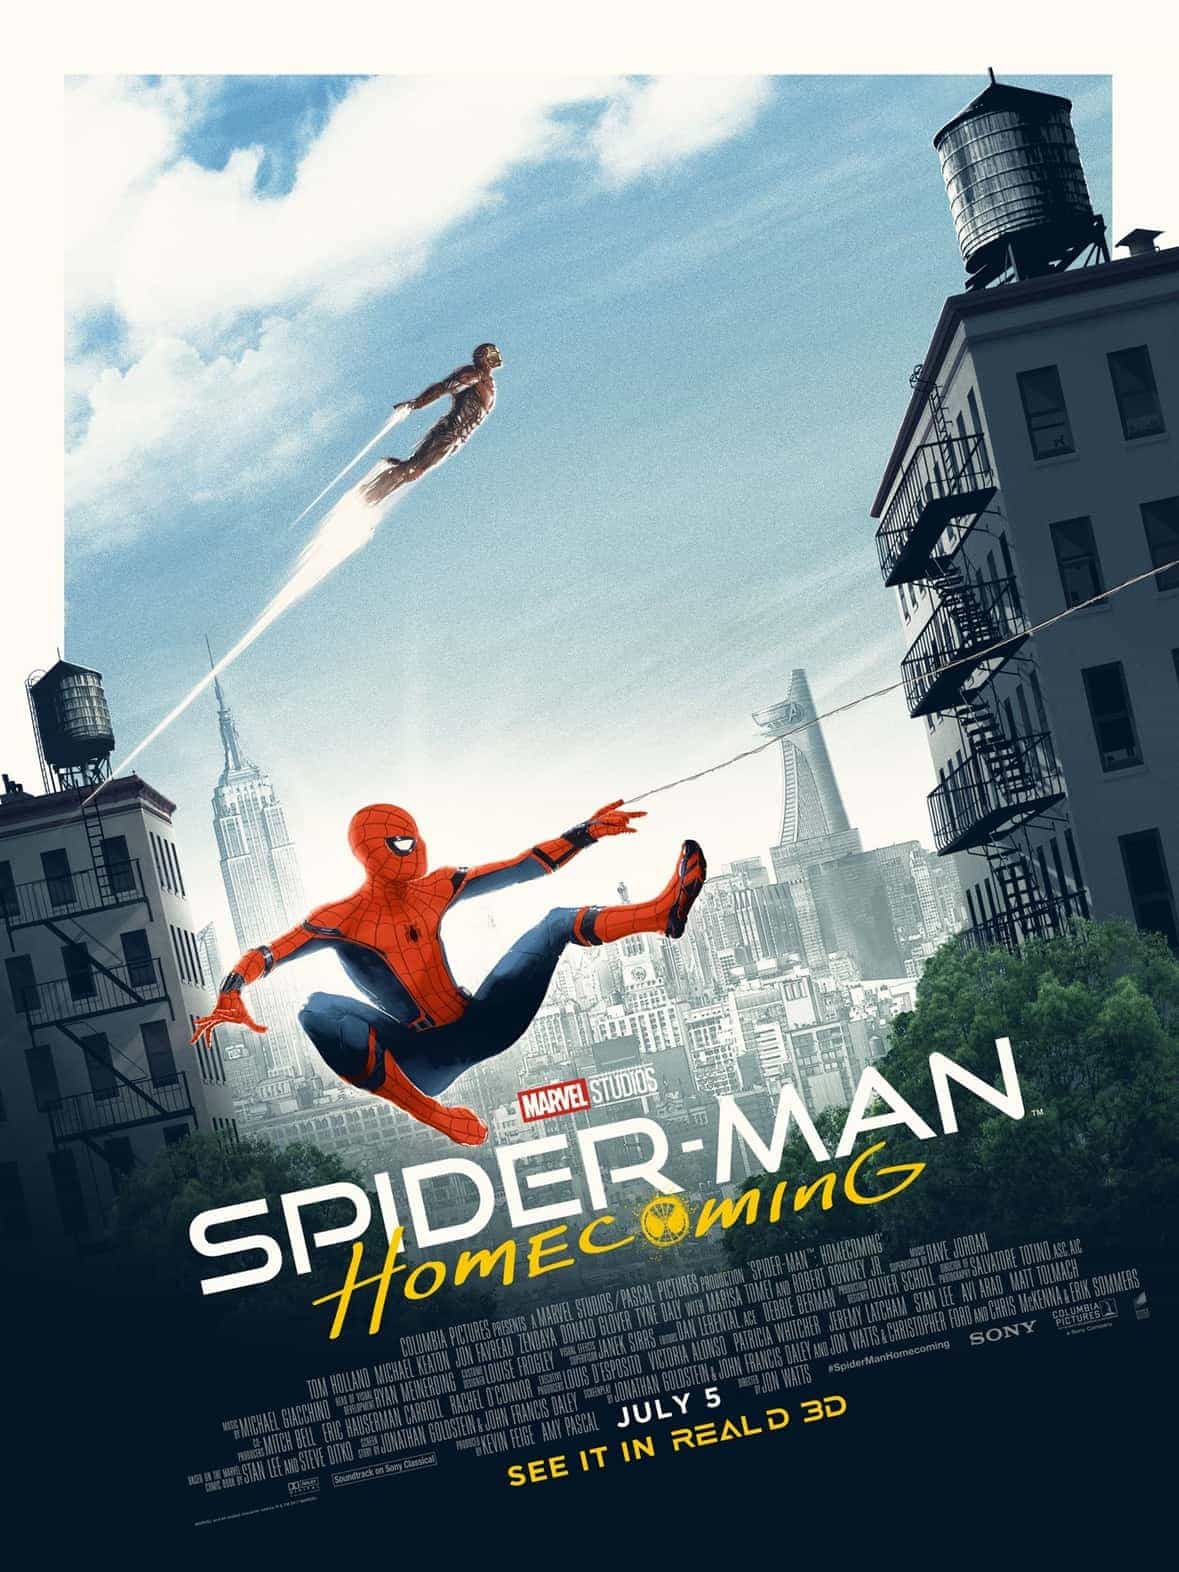 New trailer for Spider-man Homecoming, looks interesting, but turning Spidey into an Avenger, not sure about it?